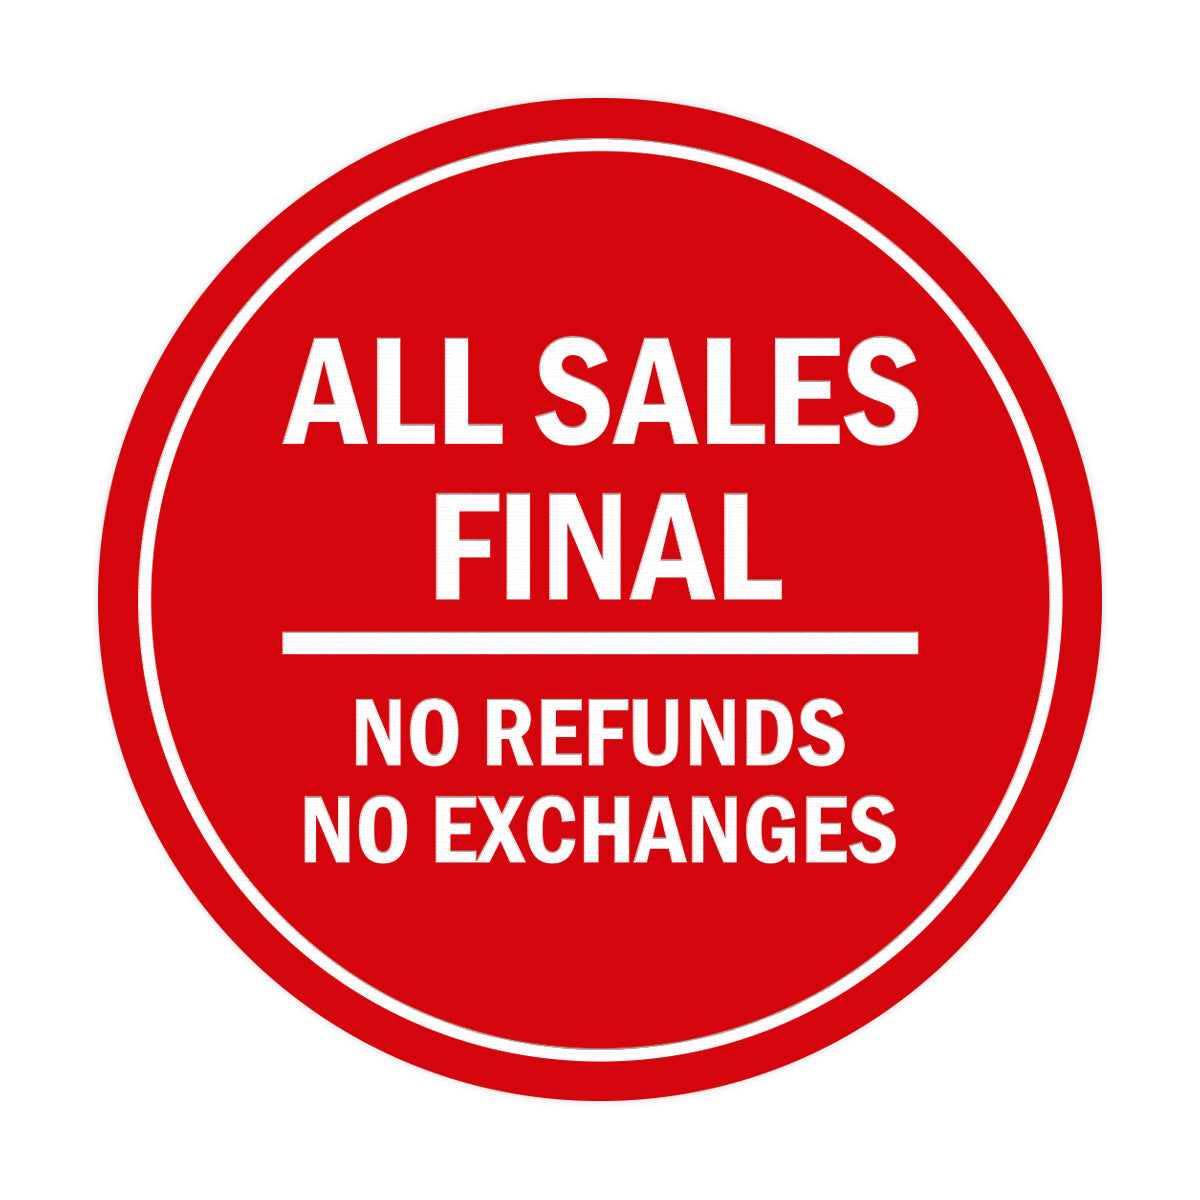 ALL UNIT SALES ARE FINAL- NO REFUNDS - EXCHANGES - CANCELLATIONS